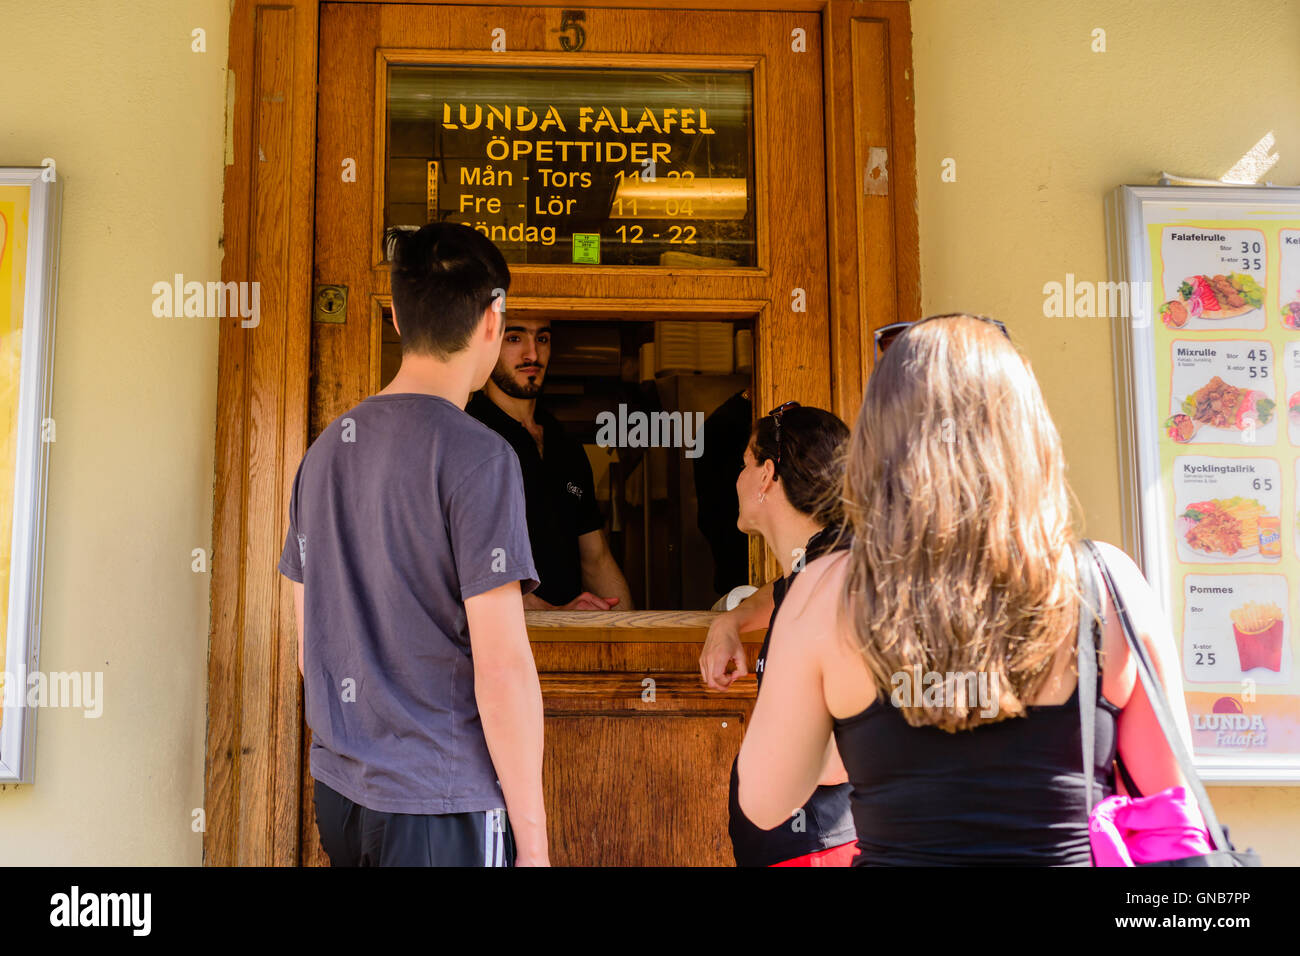 Lund, Sweden - August 24, 2016: People ordering food at Lunda Falafel, a popular fast food place serving food through a hole in Stock Photo